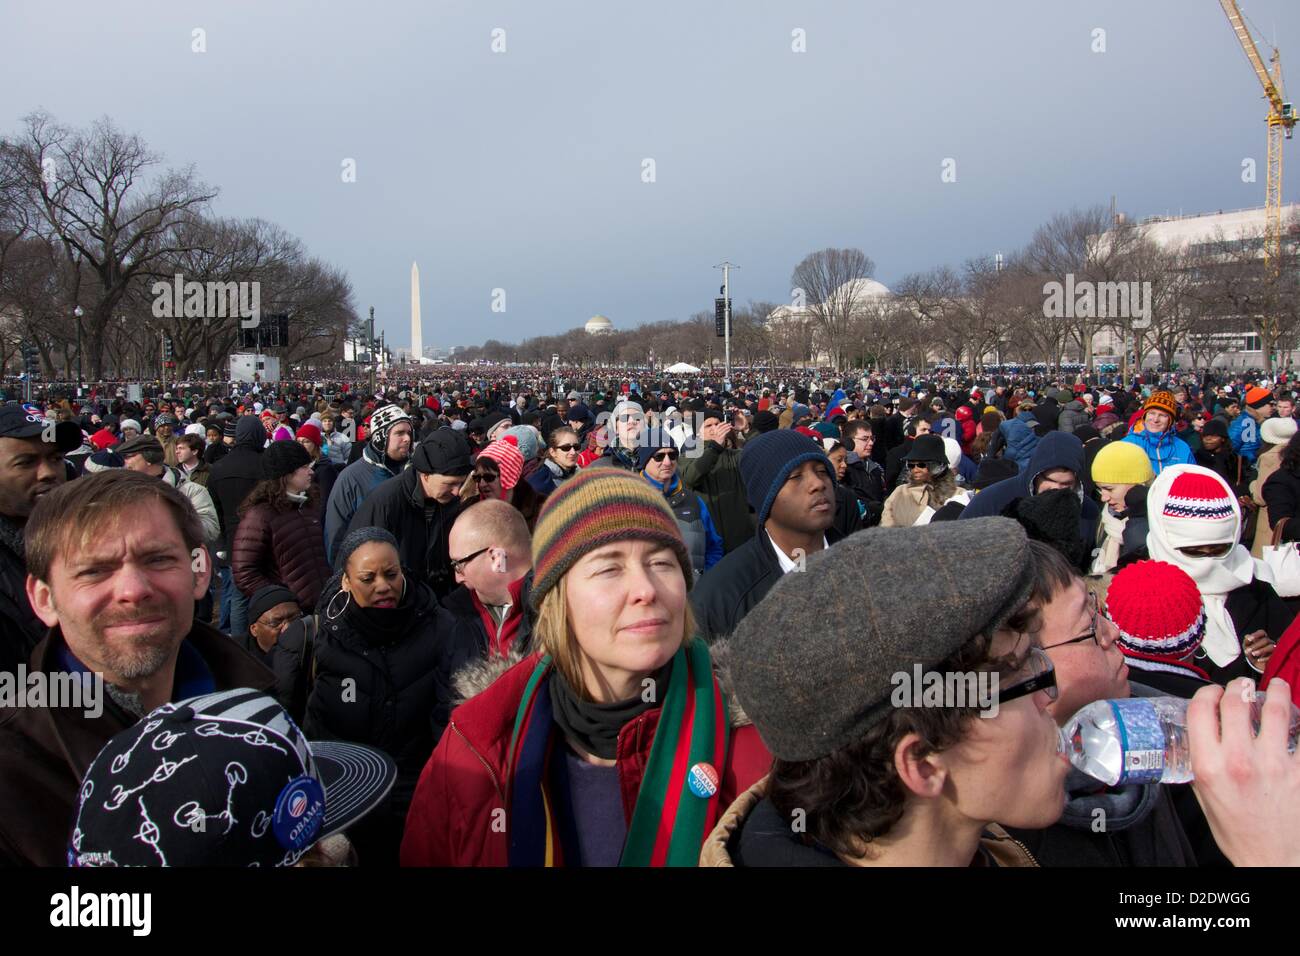 Washington DC. January 21, 2013,  A large crowd gathers on the National Mall for the inaugural ceremony. President Barack Obama, officially sworn in to a second term yesterday due to a constitutional requirement, takes a ceremonial oath of office today. Stock Photo